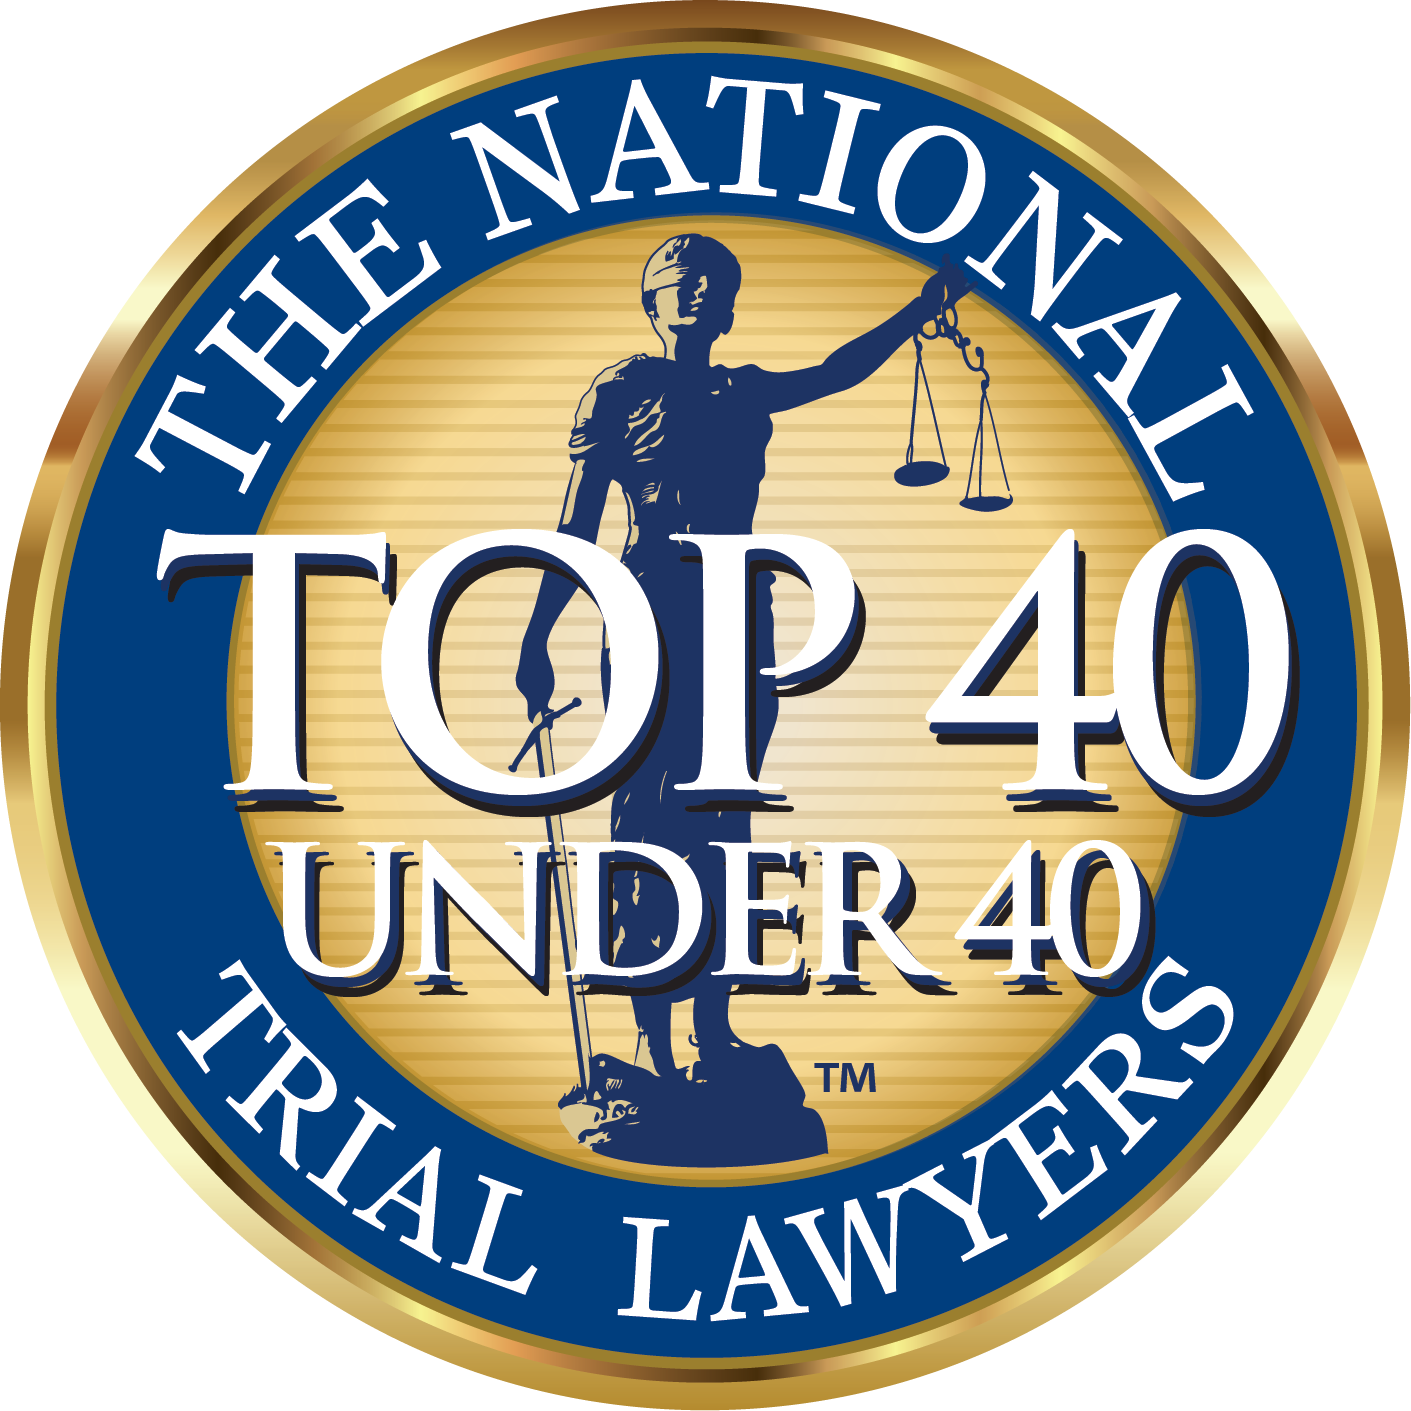 Top 40 Under 40 Trial Lawyer